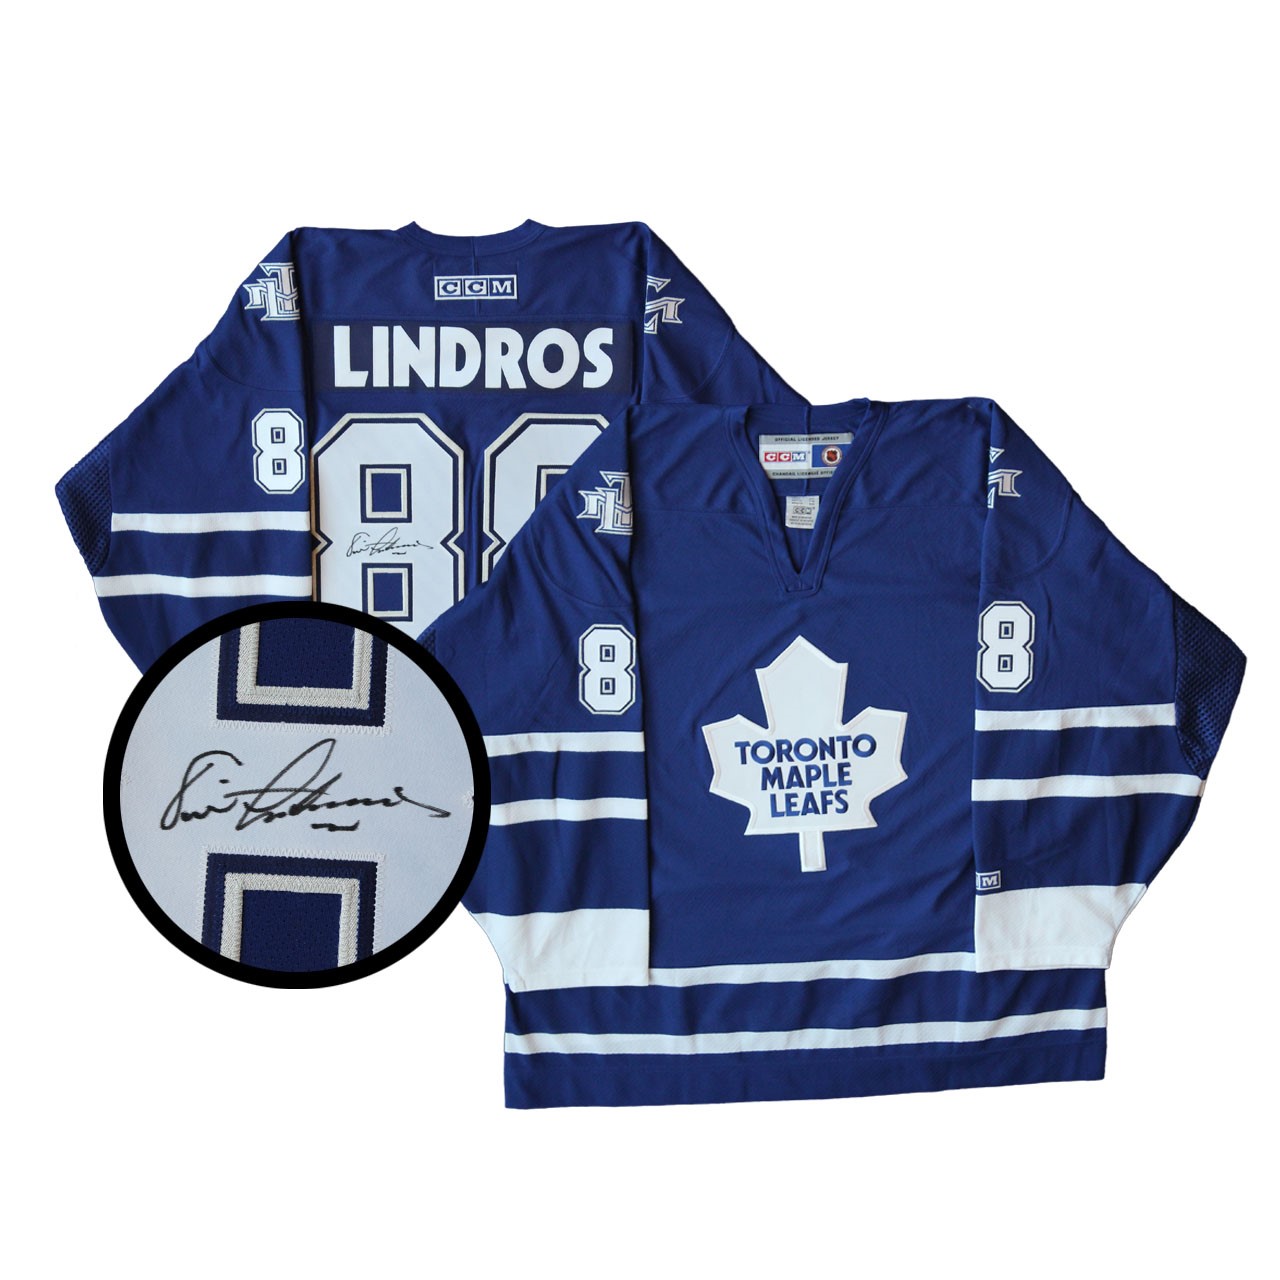 Eric Lindros Autographed Toronto Maple Leafs Jersey – Autograph